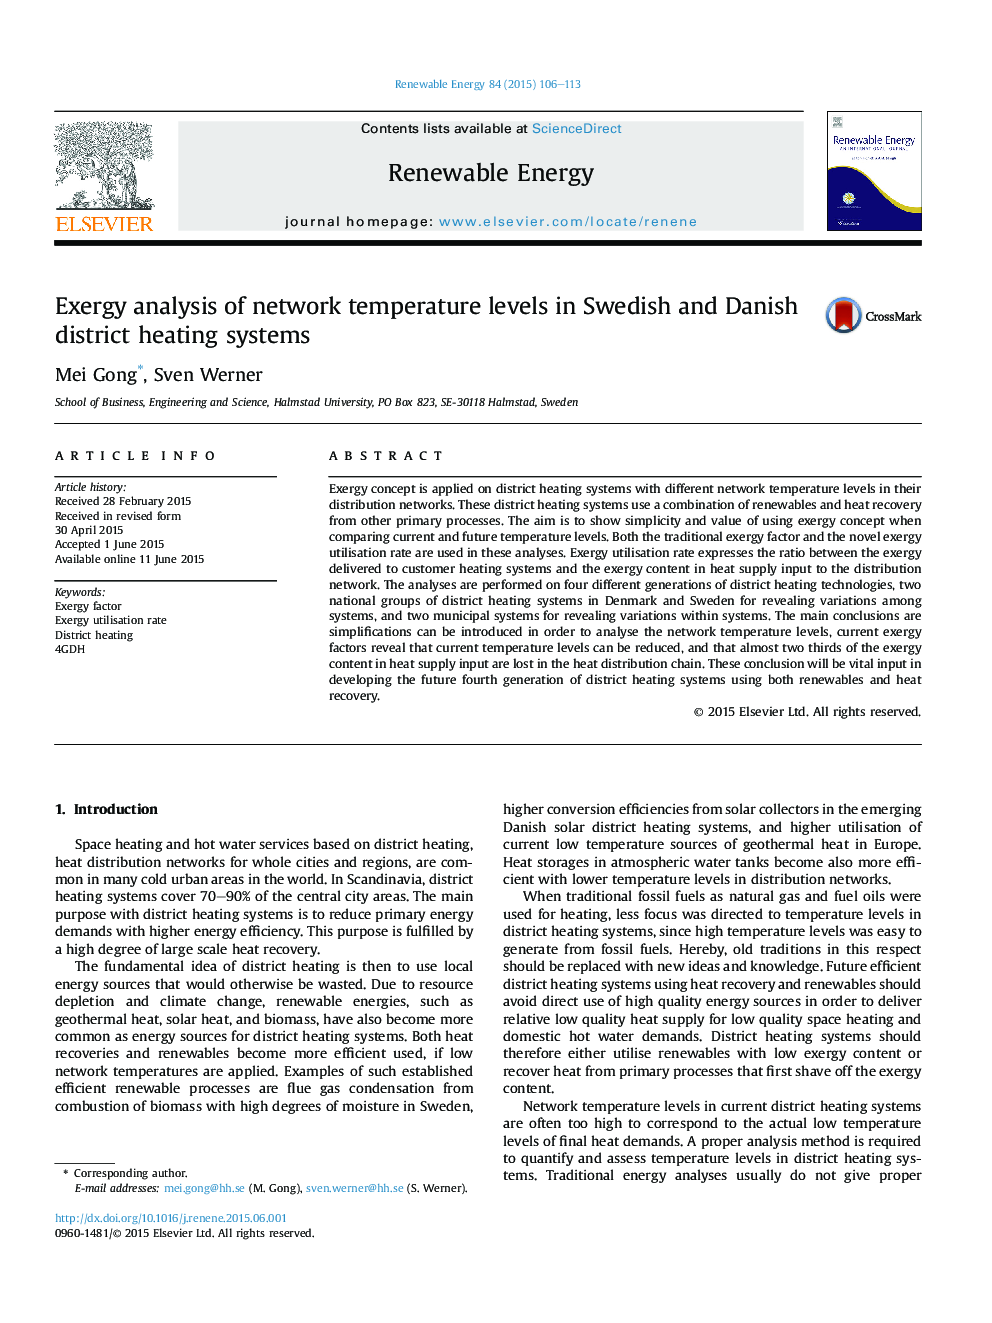 Exergy analysis of network temperature levels in Swedish and Danish district heating systems